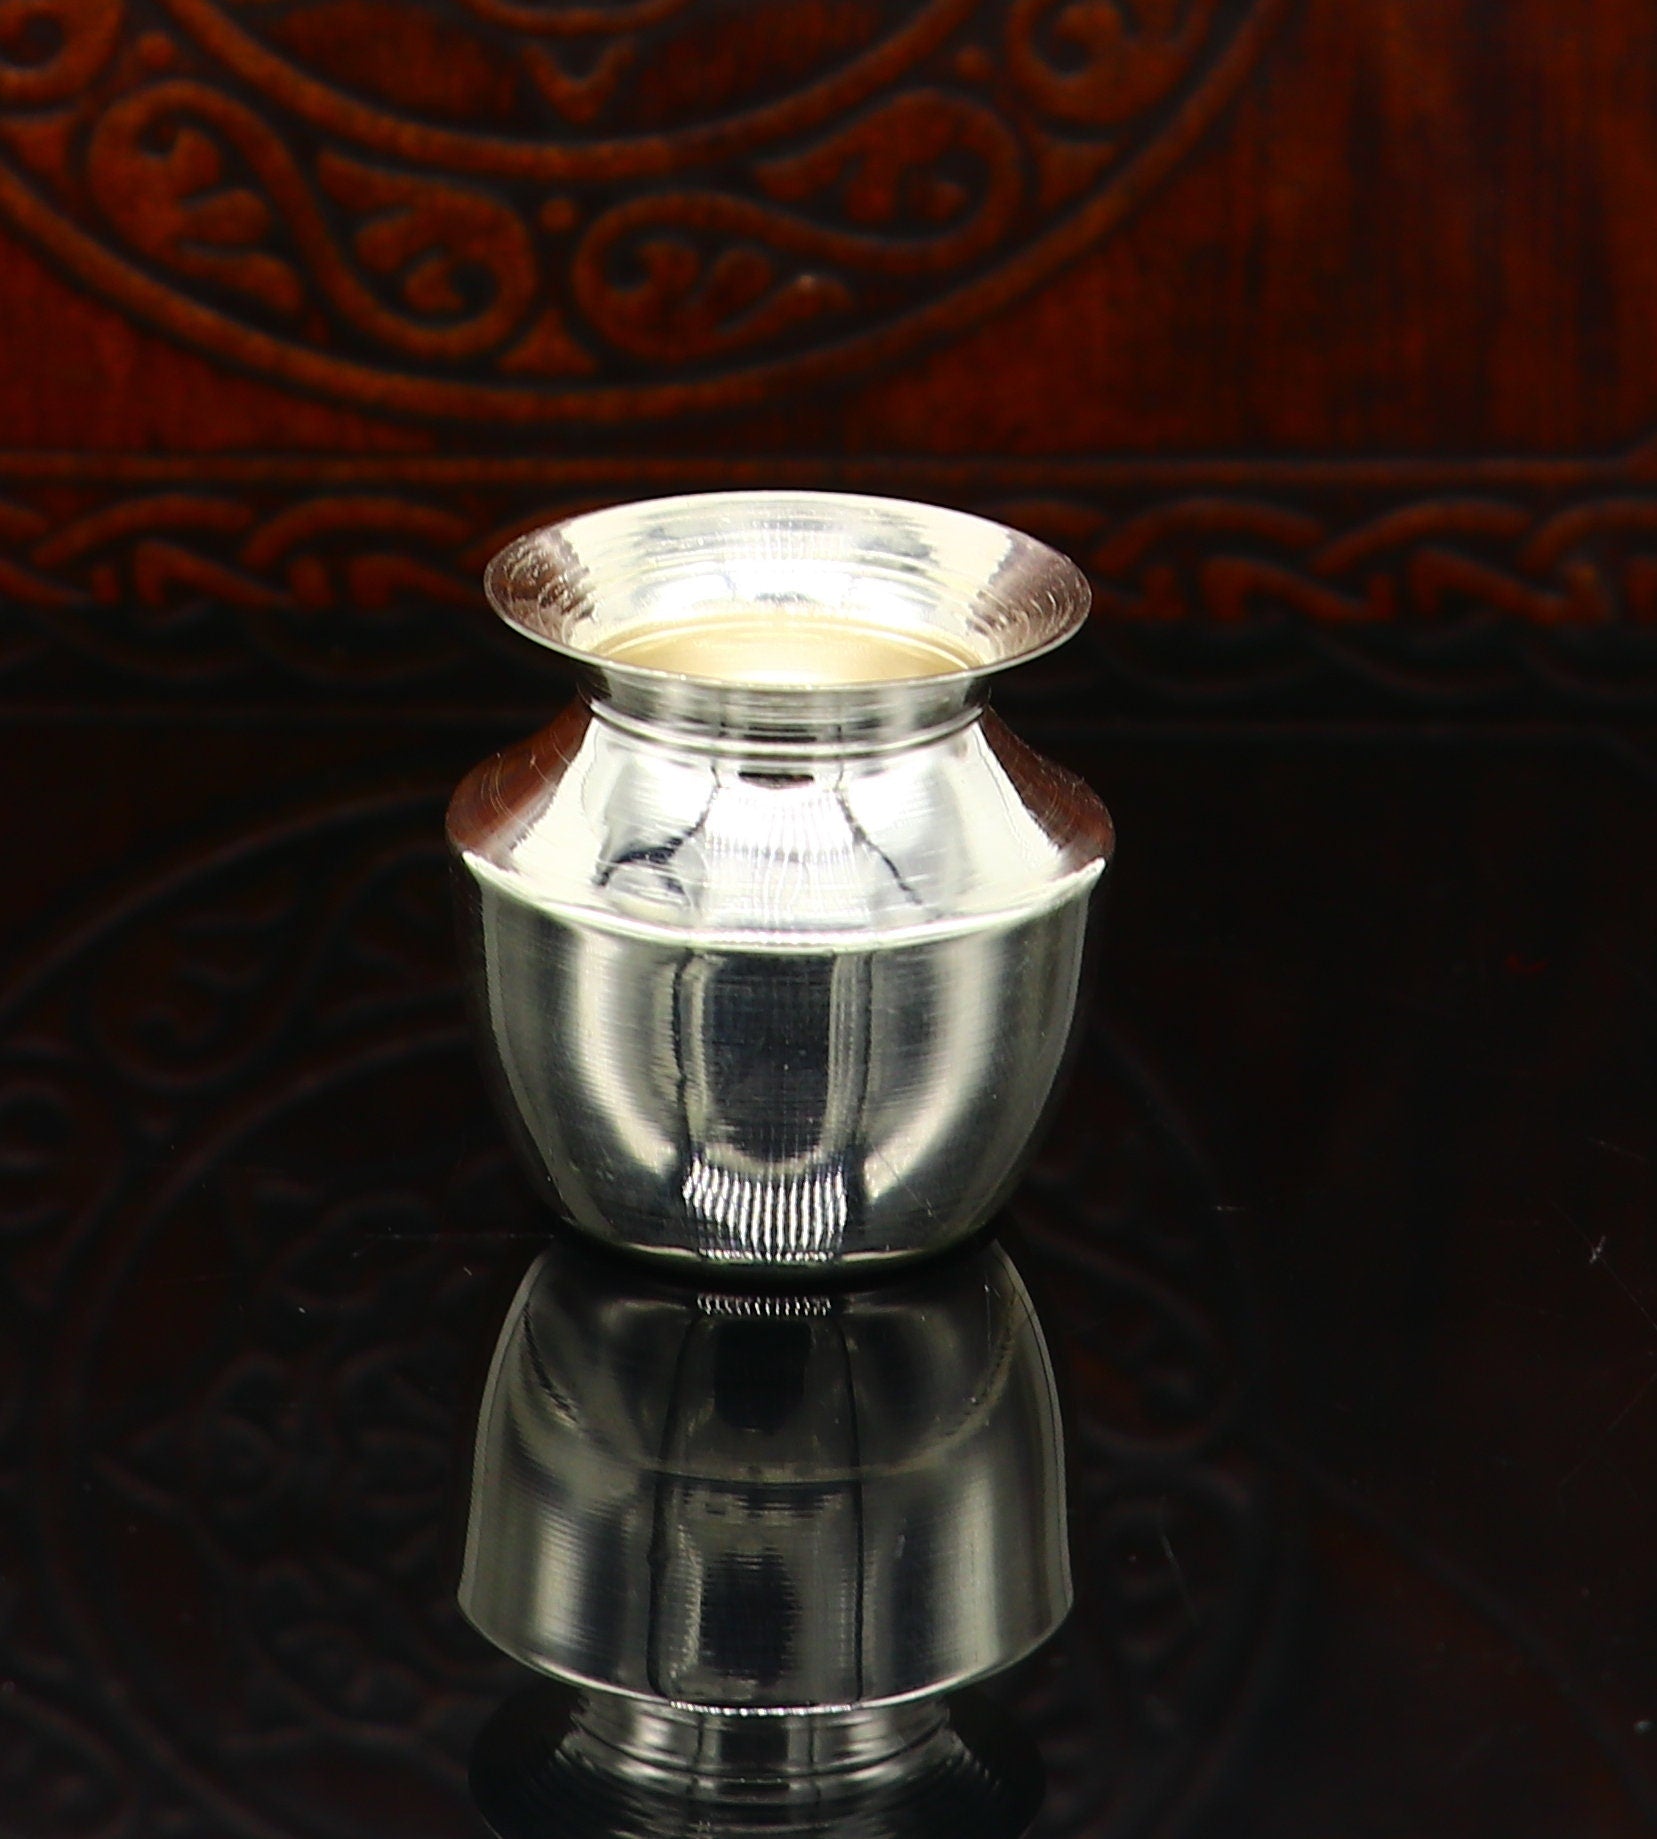 Pure 925 sterling silver handmade plain small Kalash or pot, unique special silver puja article, water or milk kalash pot india sv220 - TRIBAL ORNAMENTS